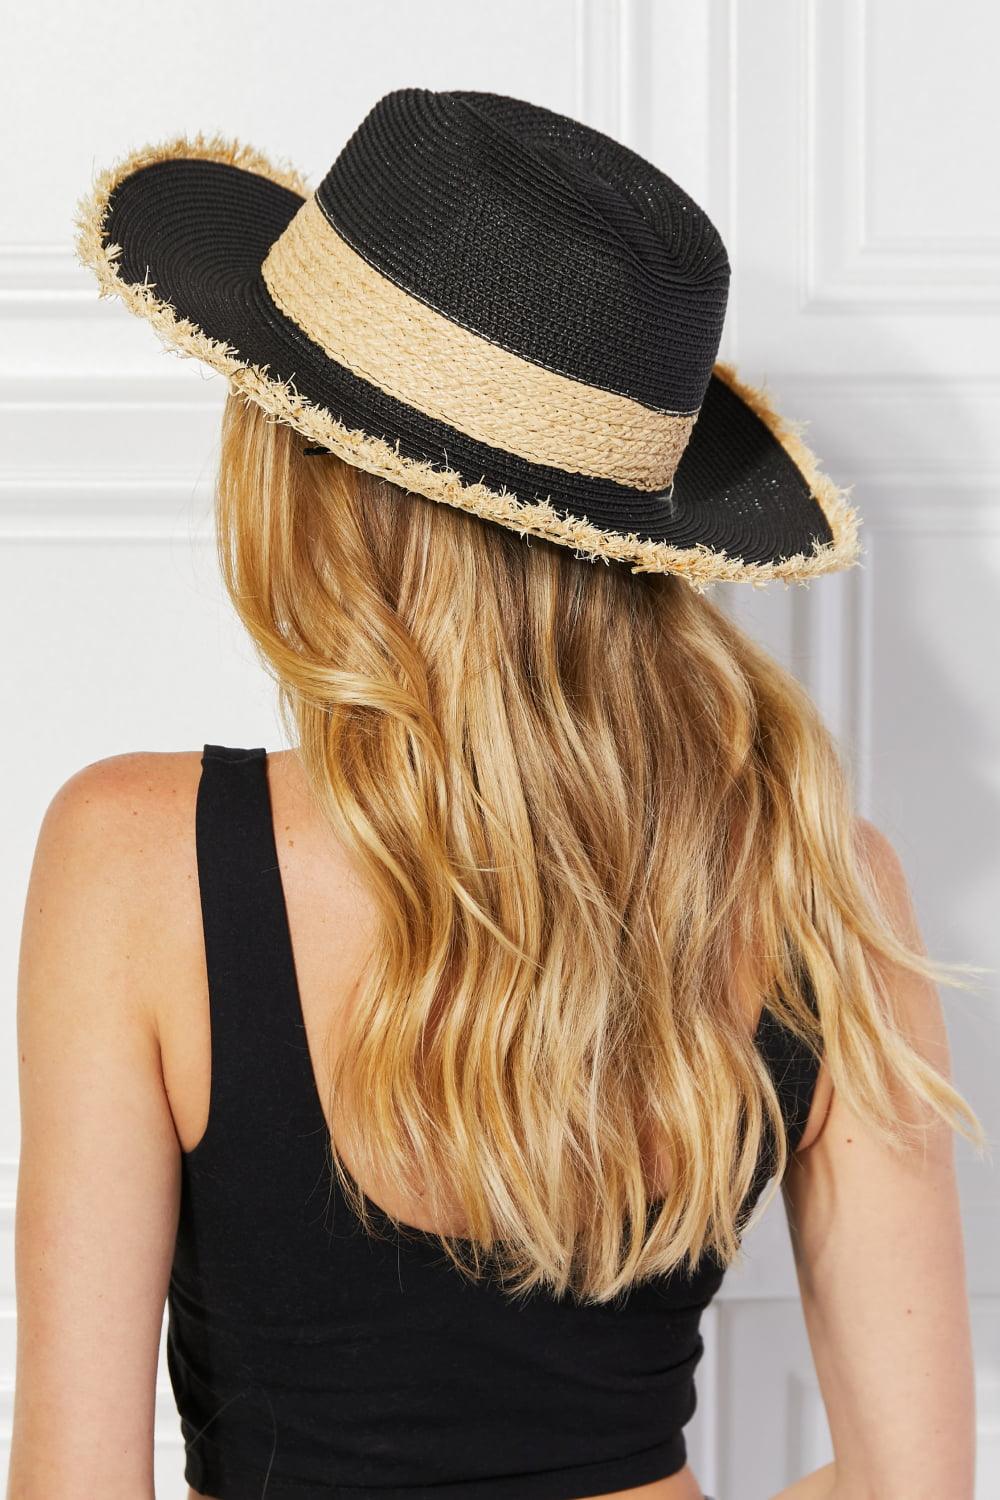 Justin Taylor Poolside Baby Straw Fedora Hat in Black - The Fiery Jasmine